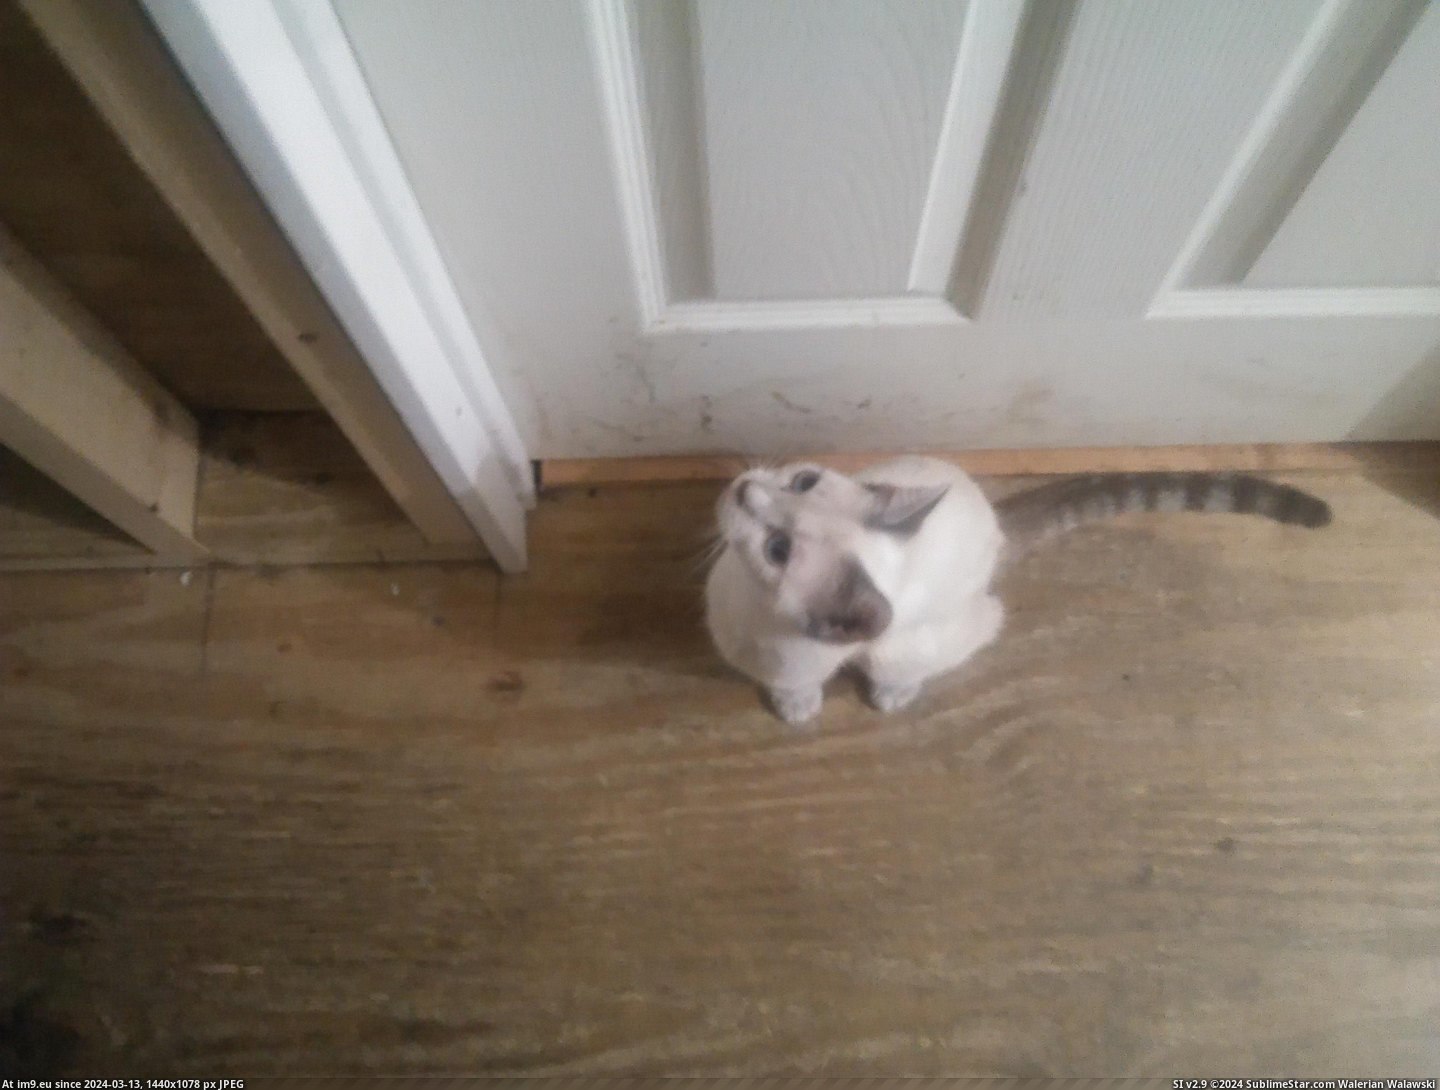 #Cats #Likes #Door #Stretching #Meowing #Sitting #Bedroom #Snowy [Cats] Snowy likes sitting outside of my bedroom door, meowing and stretching at the door until I open the door 5 Pic. (Image of album My r/CATS favs))